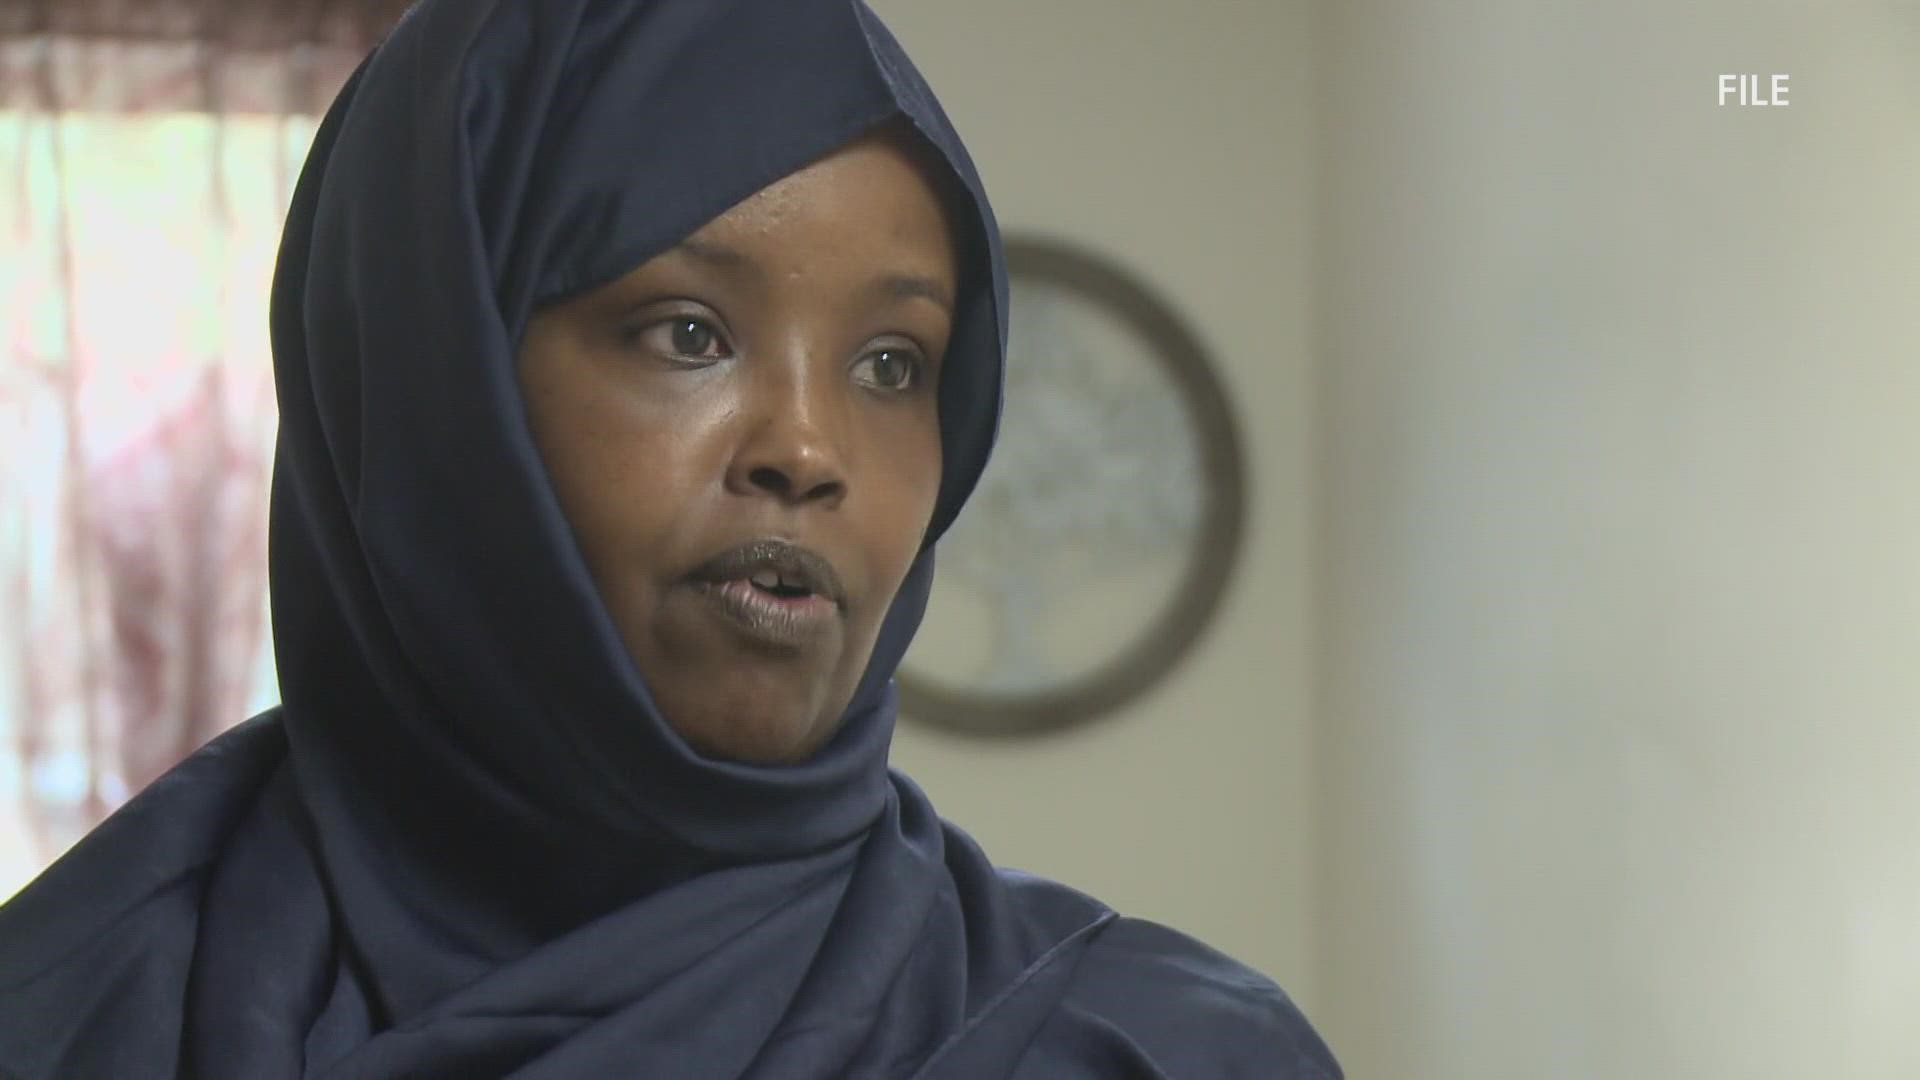 Fowsia Musse, executive director of Maine Community Integration, was seriously injured in an attack in eastern Ethiopia that killed her sister.